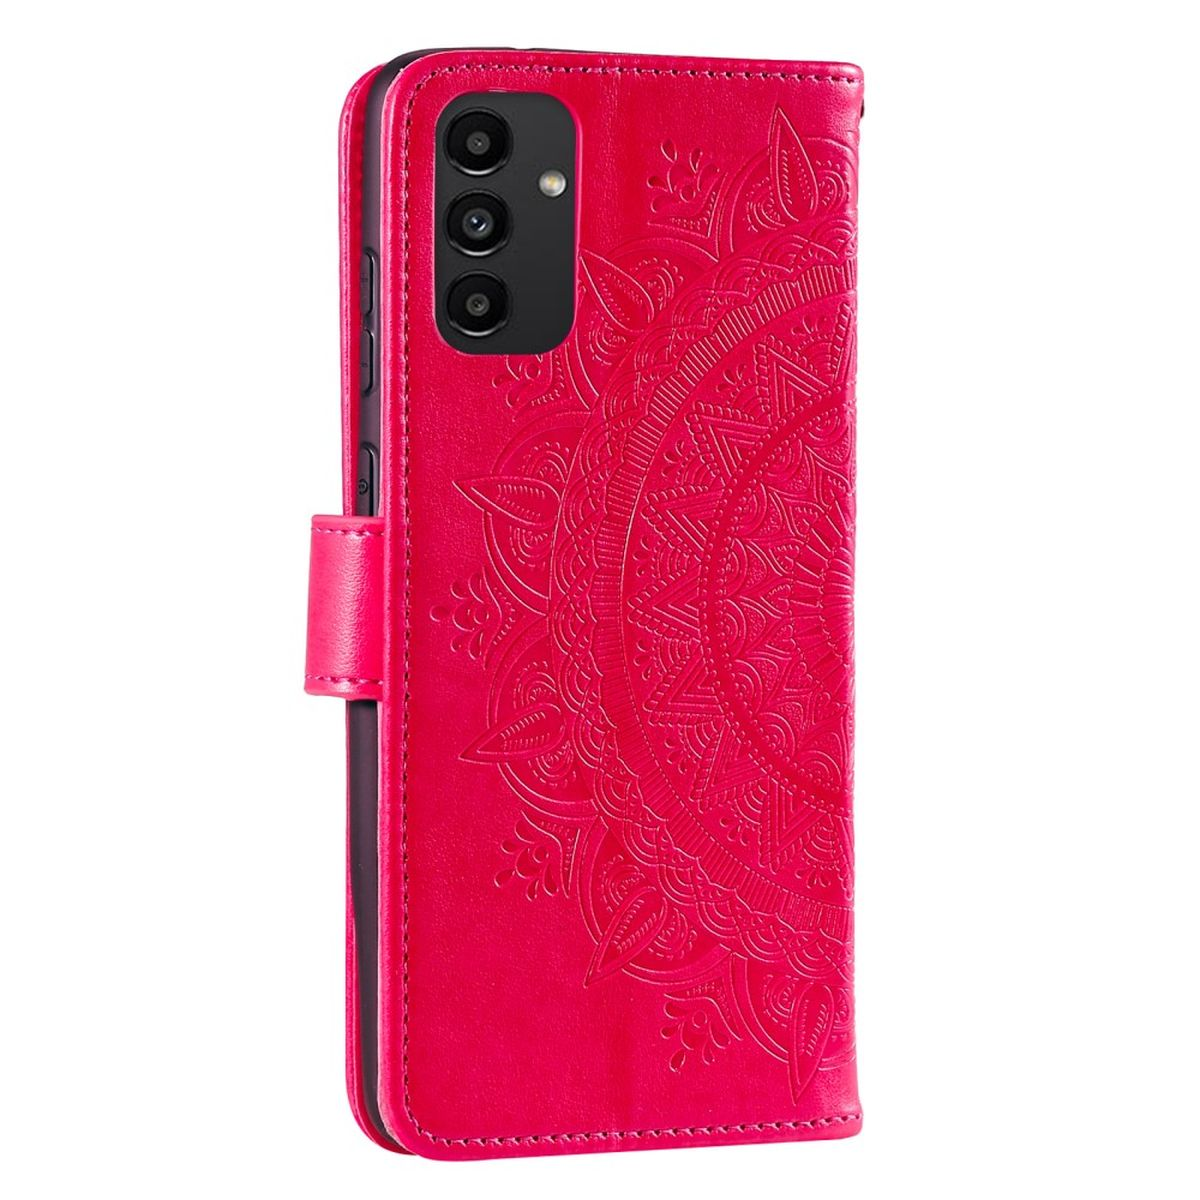 COVERKINGZ Klapphülle mit Mandala Muster, A13 Pink 5G/Galaxy Bookcover, Samsung, A04s, Galaxy